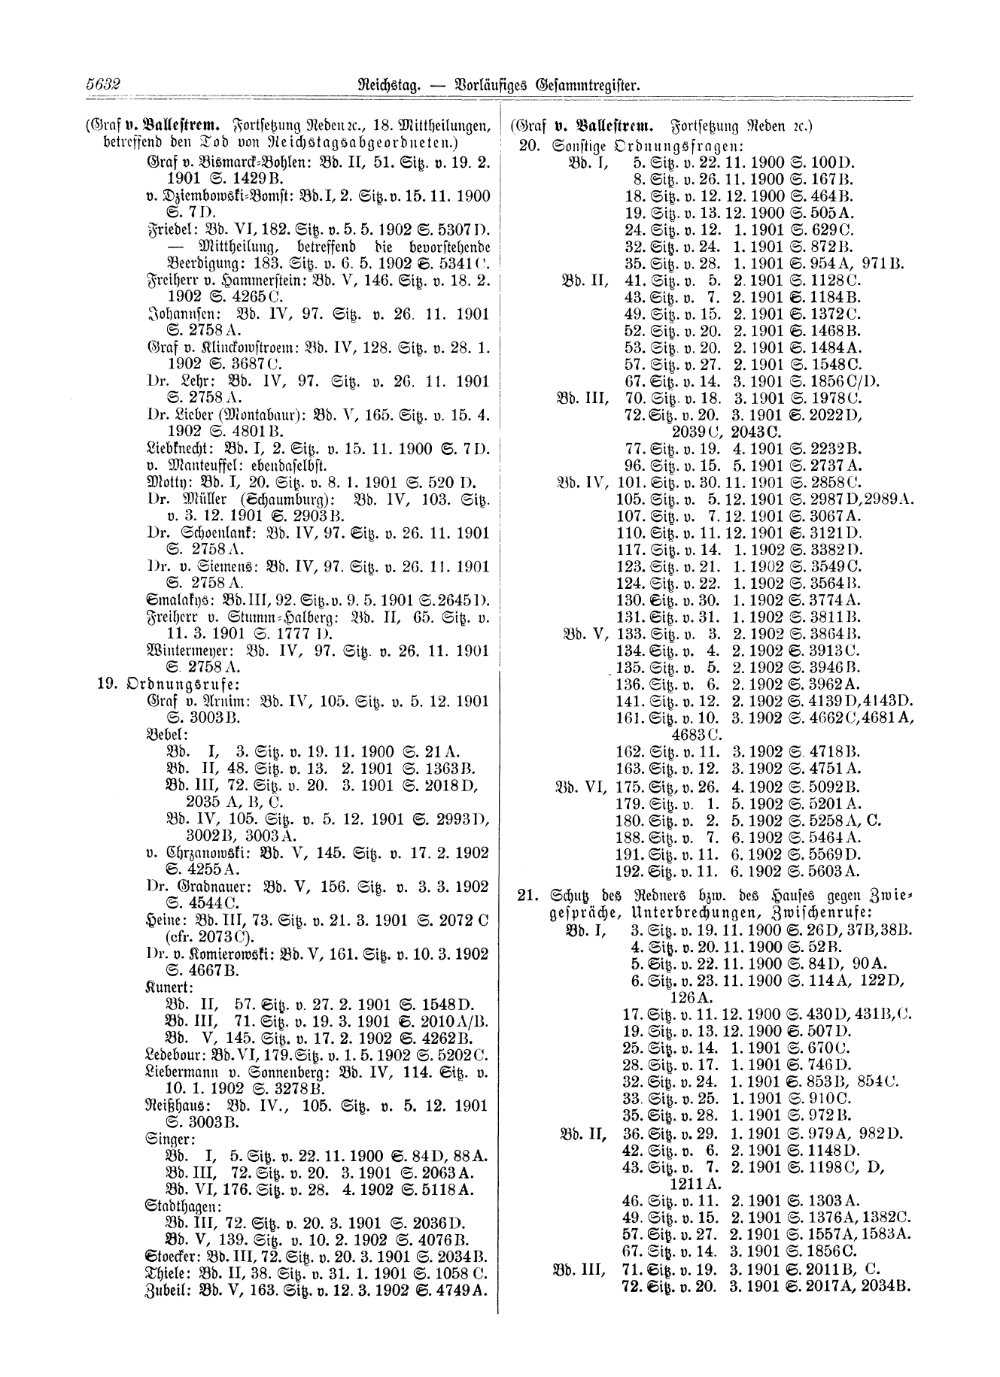 Scan of page 5632